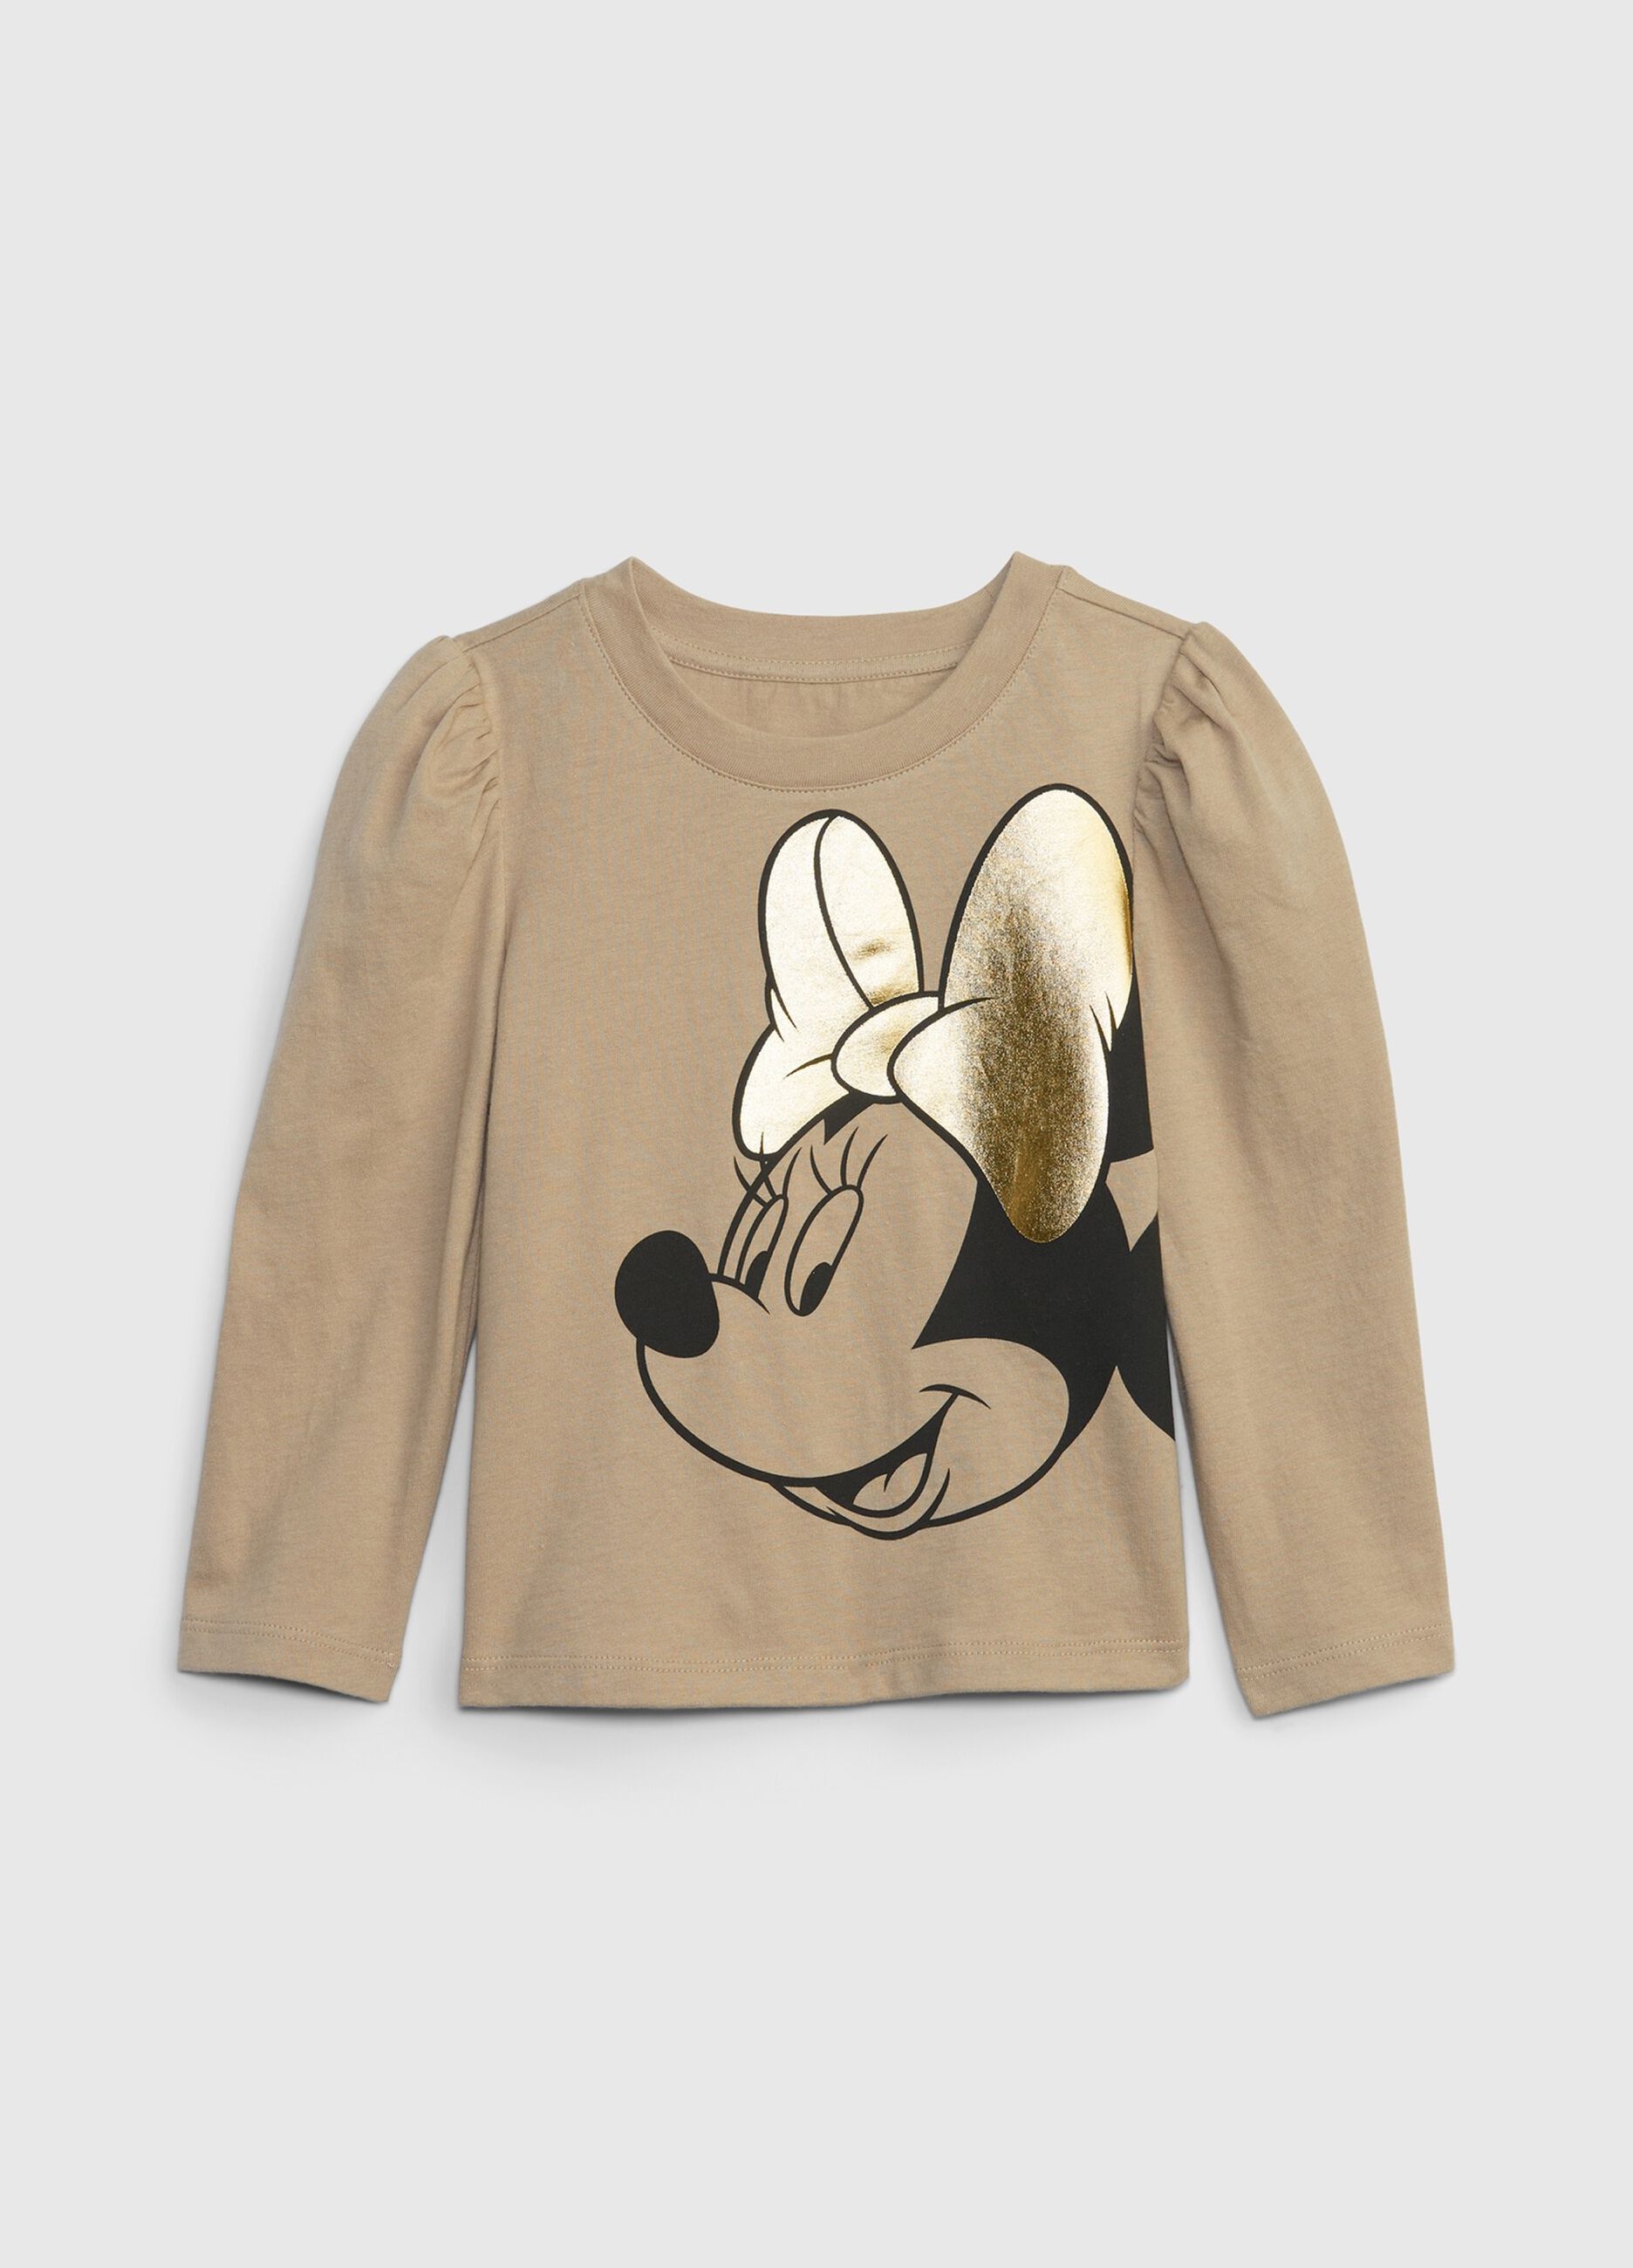 Organic cotton T-shirt with Disney Minnie Mouse print